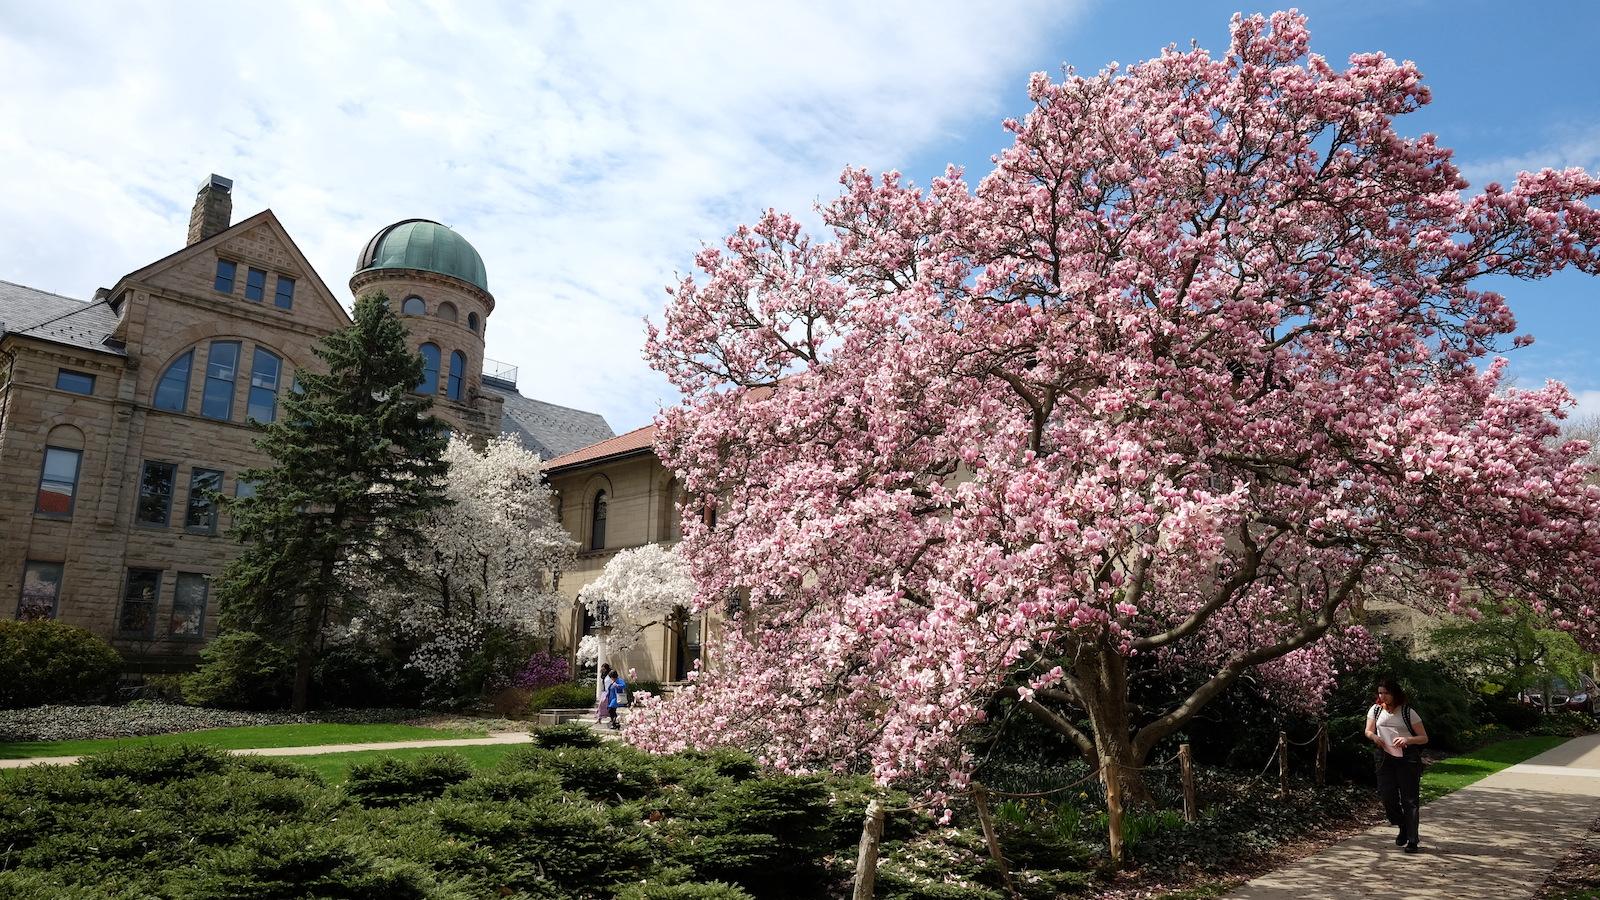 Peters Hall behind a magnolia tree in spring.